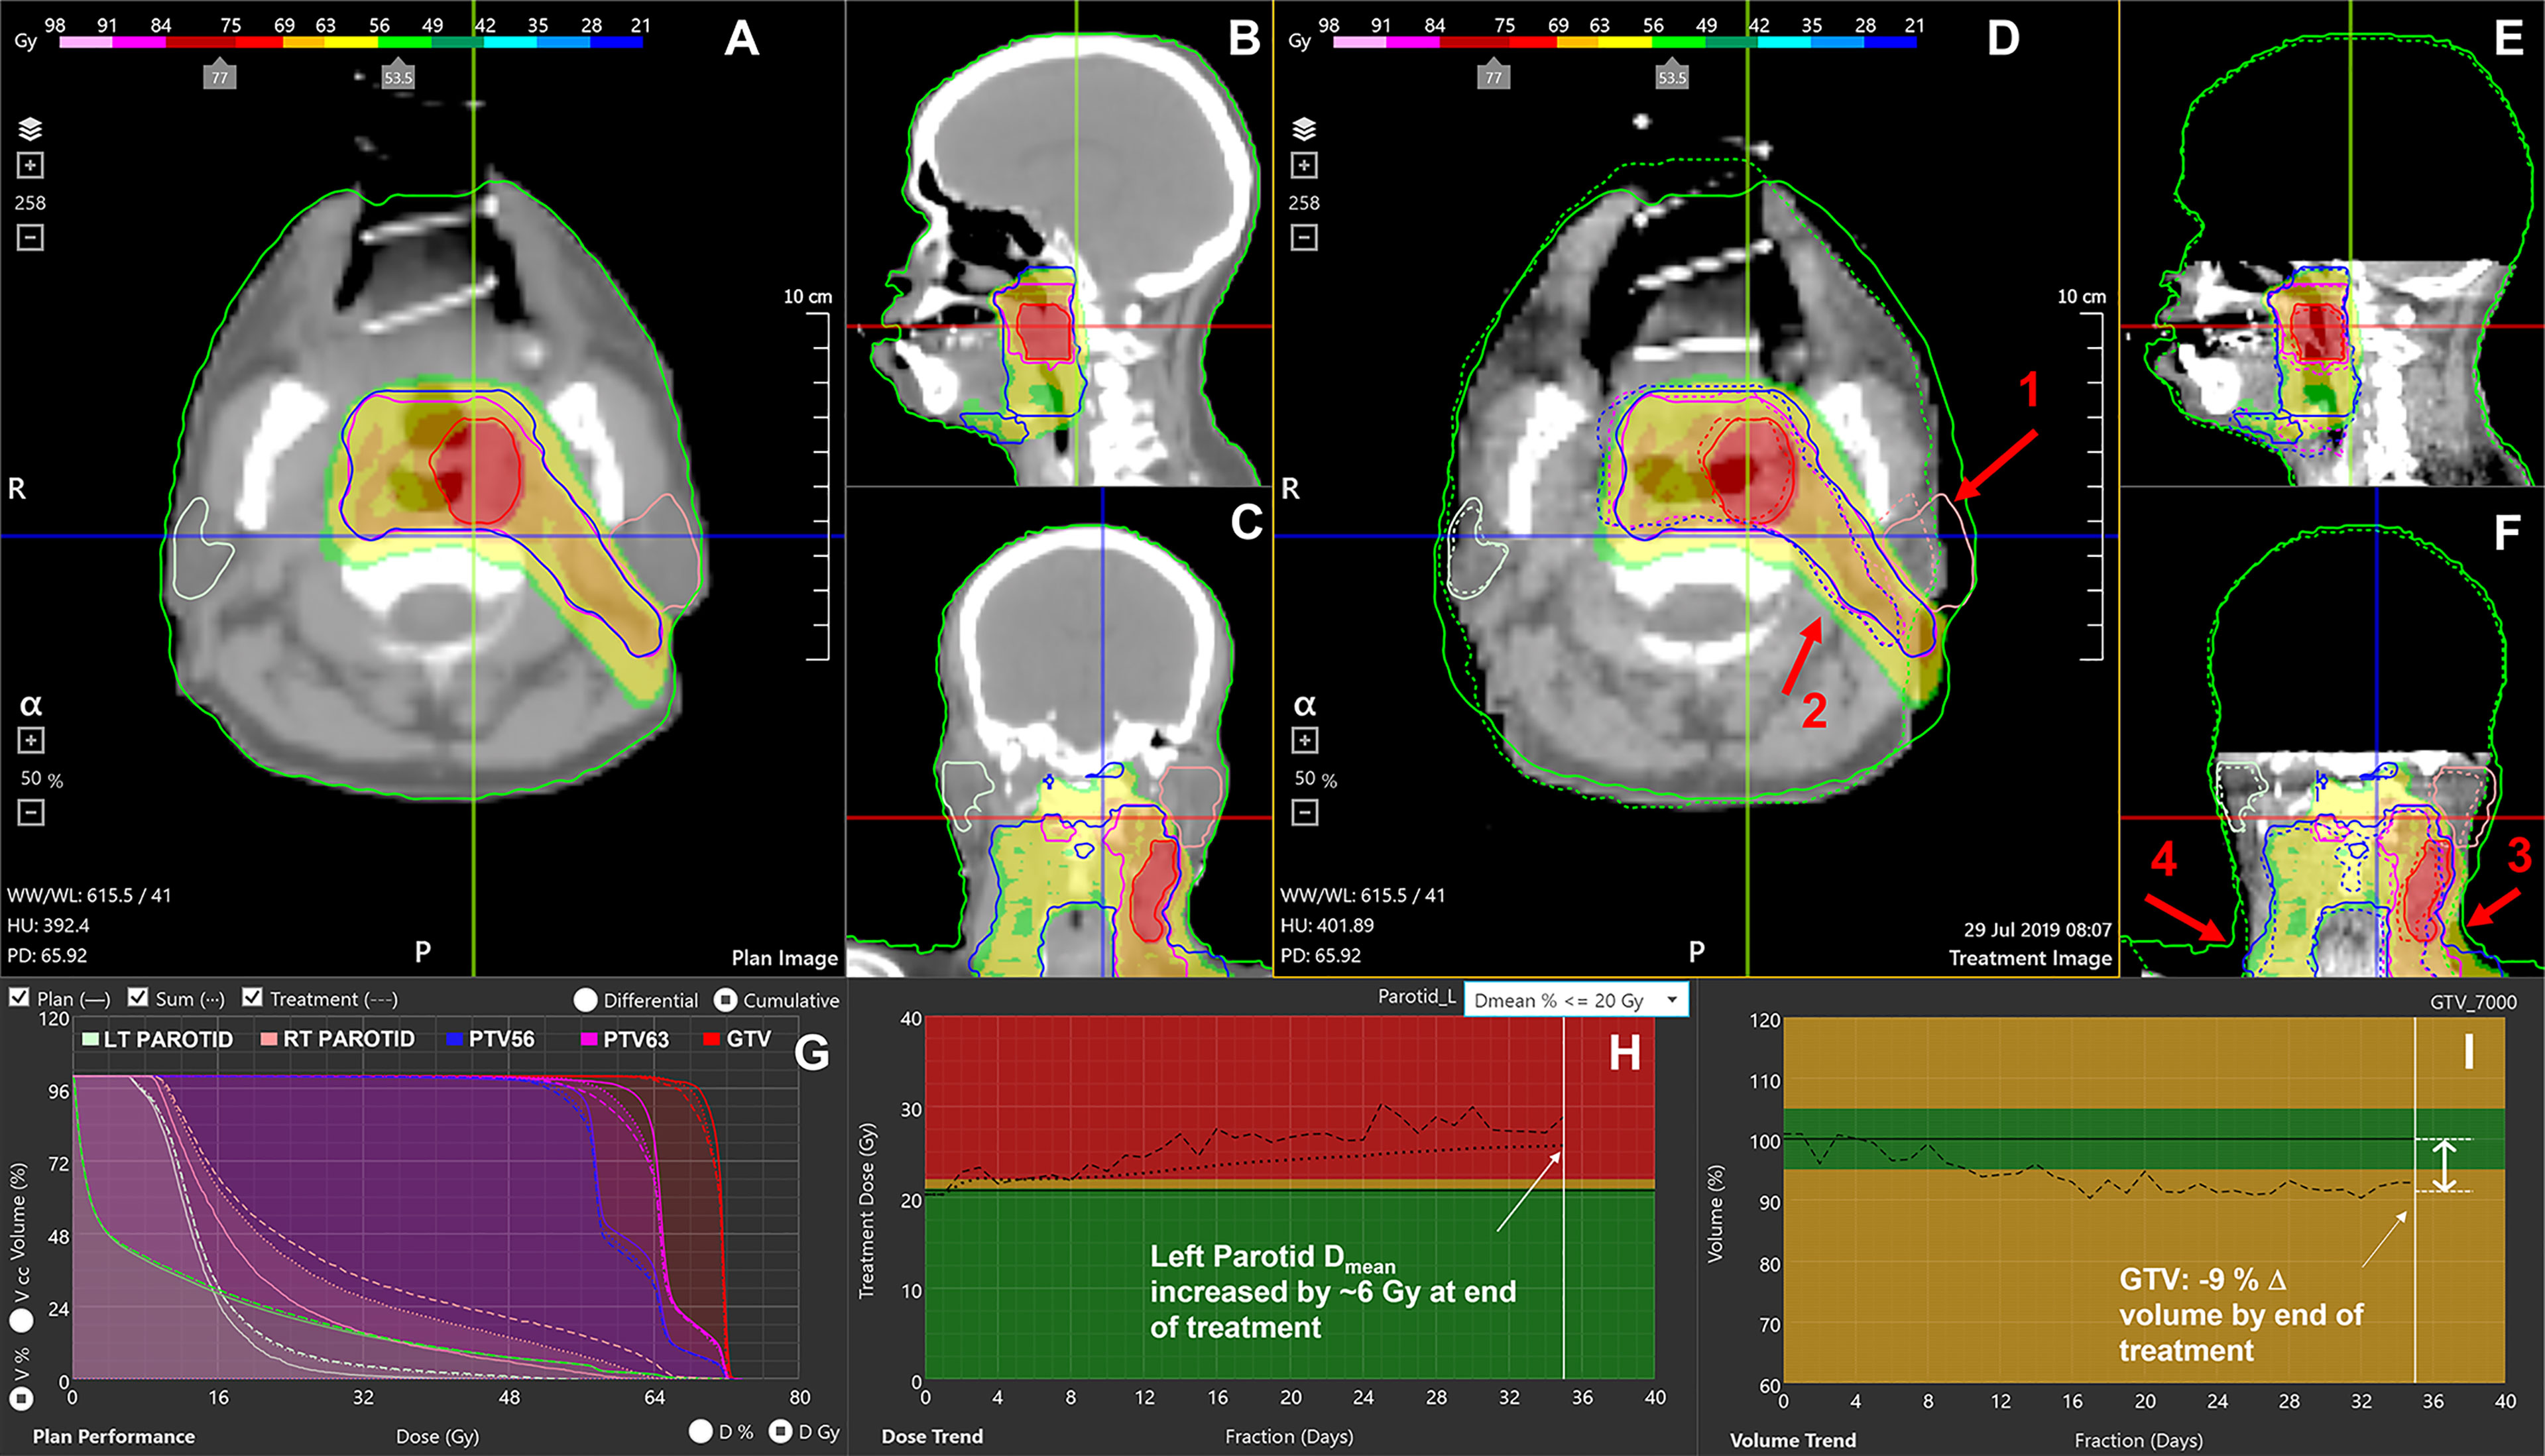 Frontiers  Retrospective Clinical Evaluation of a Decision-Support  Software for Adaptive Radiotherapy of Head and Neck Cancer Patients